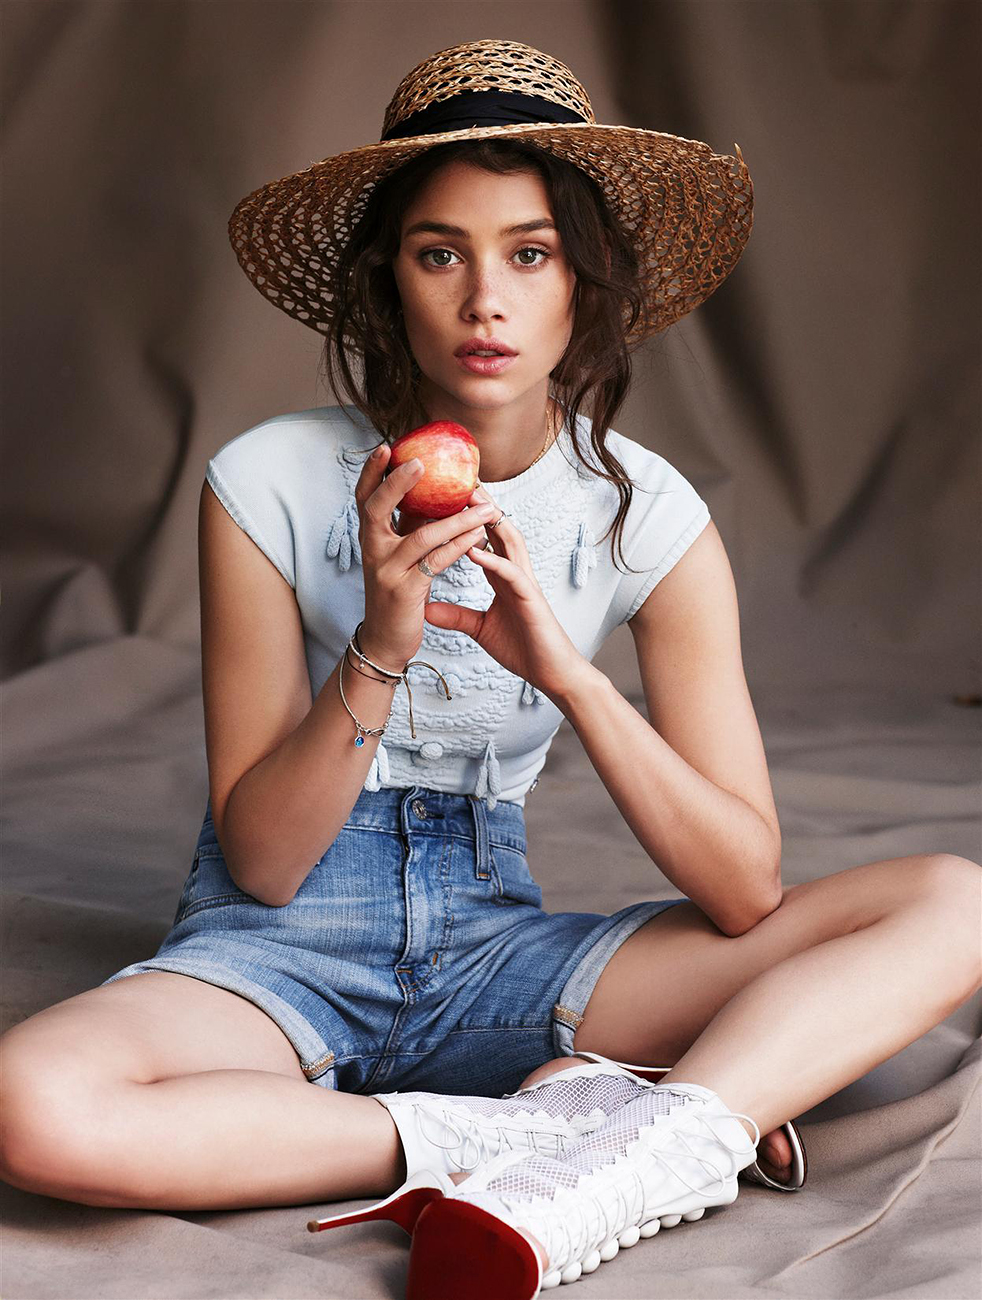 Astrid Berges Frisbey Women Model Brunette French French Women Apples Hat High Waist Shorts 982x1300